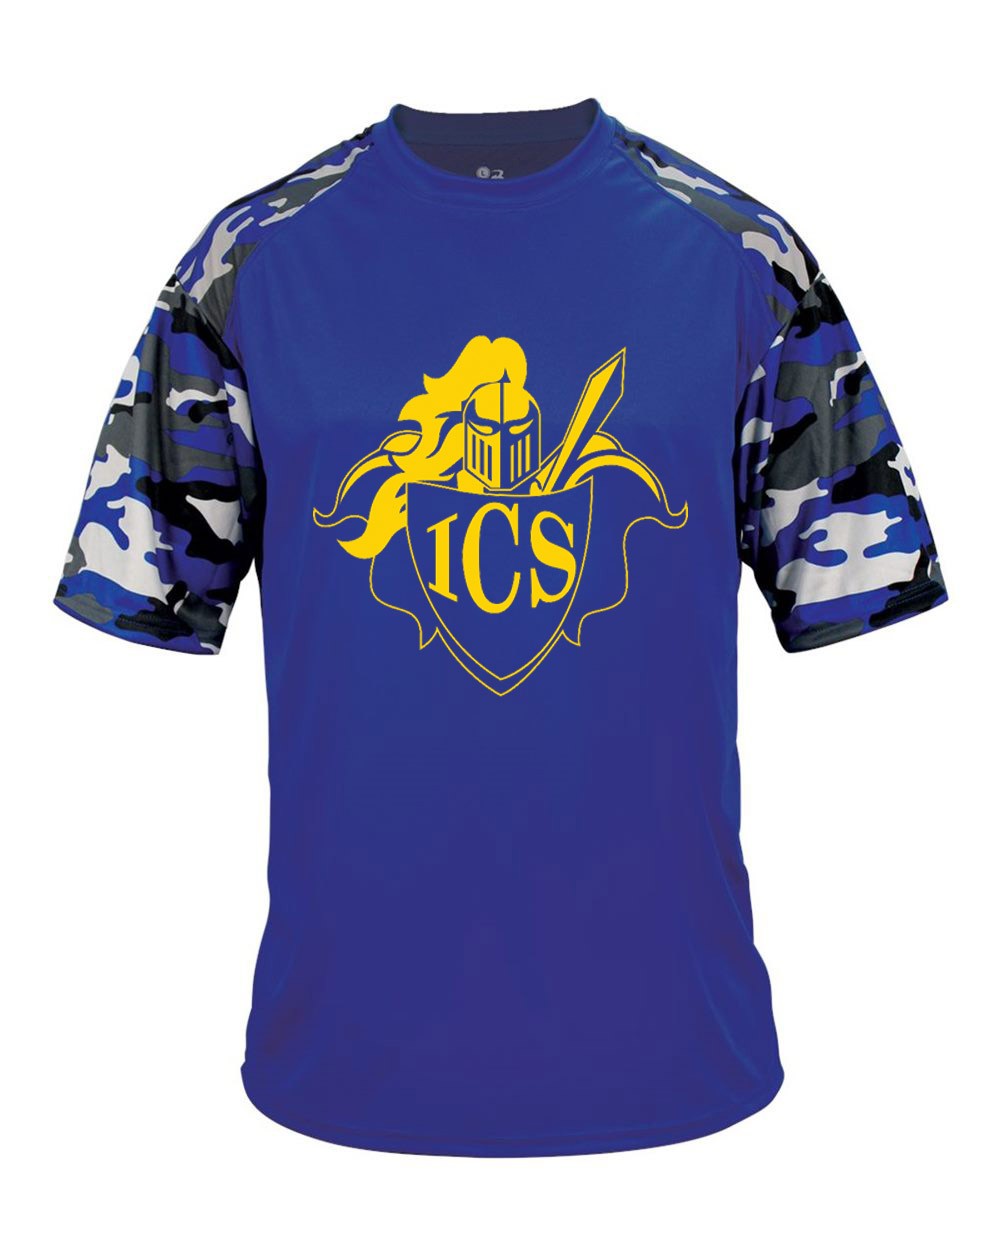 ICS Spirit S/S Camo T-Shirt w/ Gold Logo - Please Allow 2-3 Weeks for Delivery